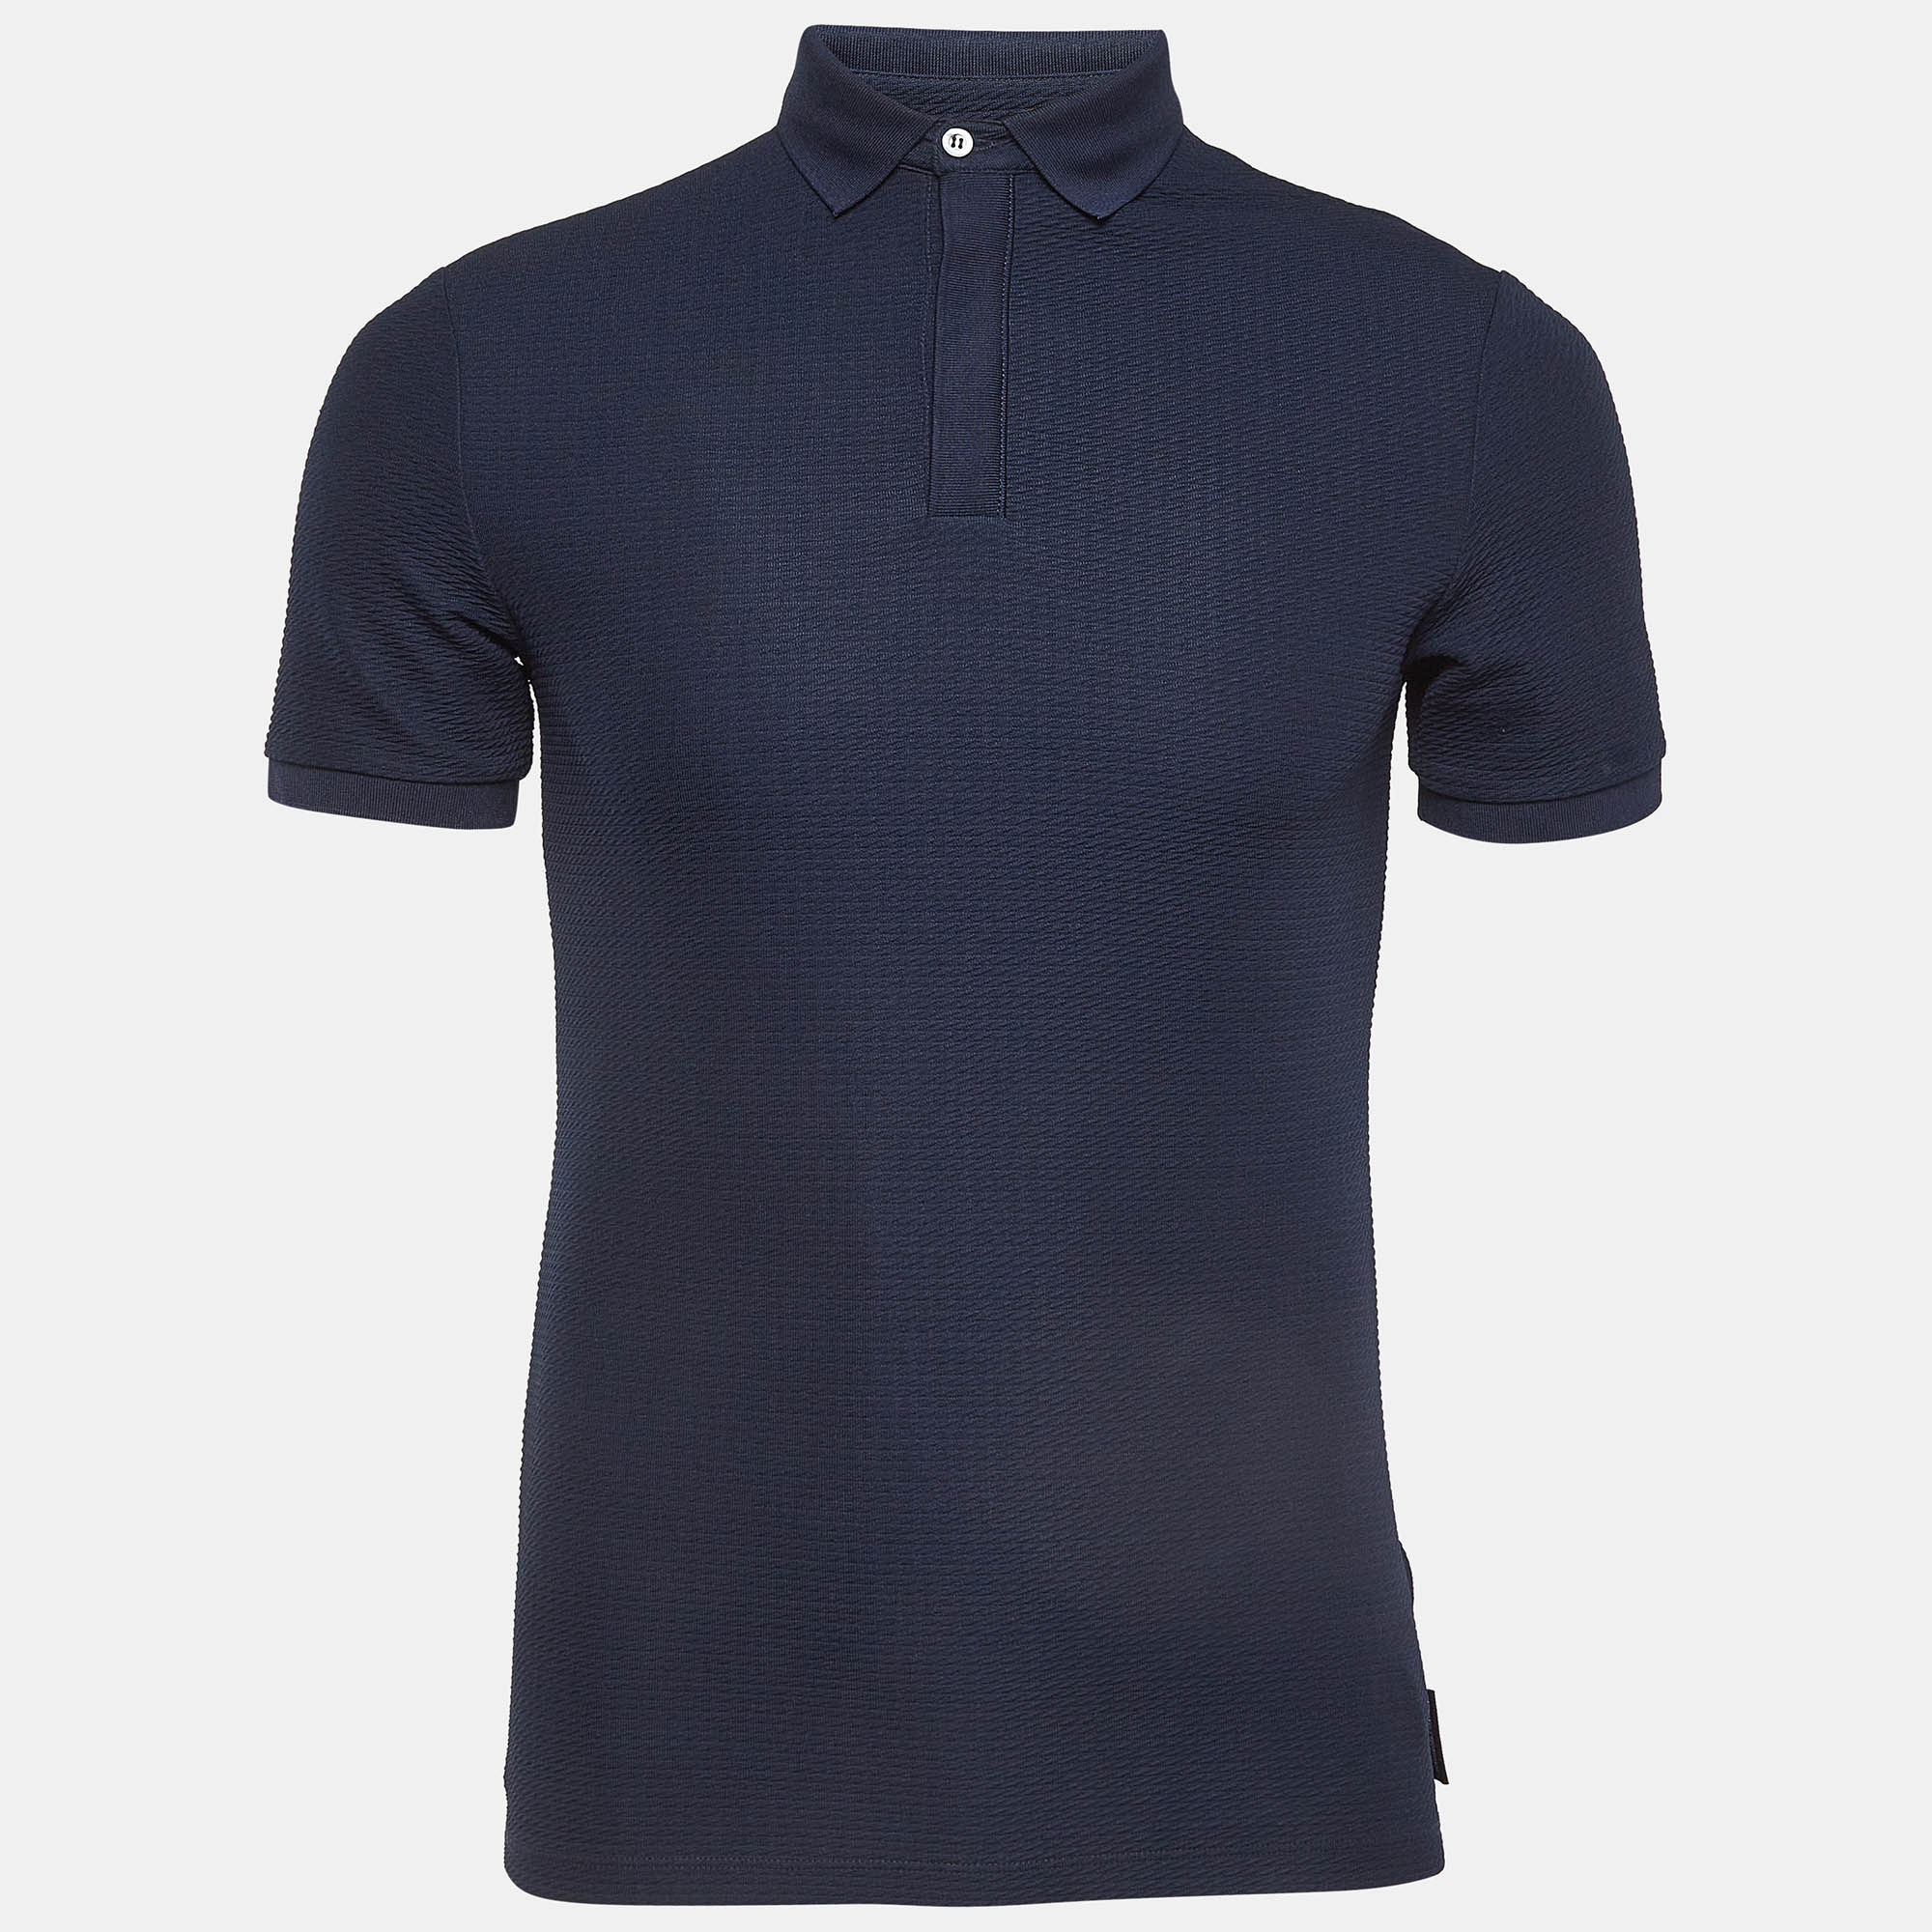 

Emporio Armani Navy Blue Patterned Knit Polo Tshirt S